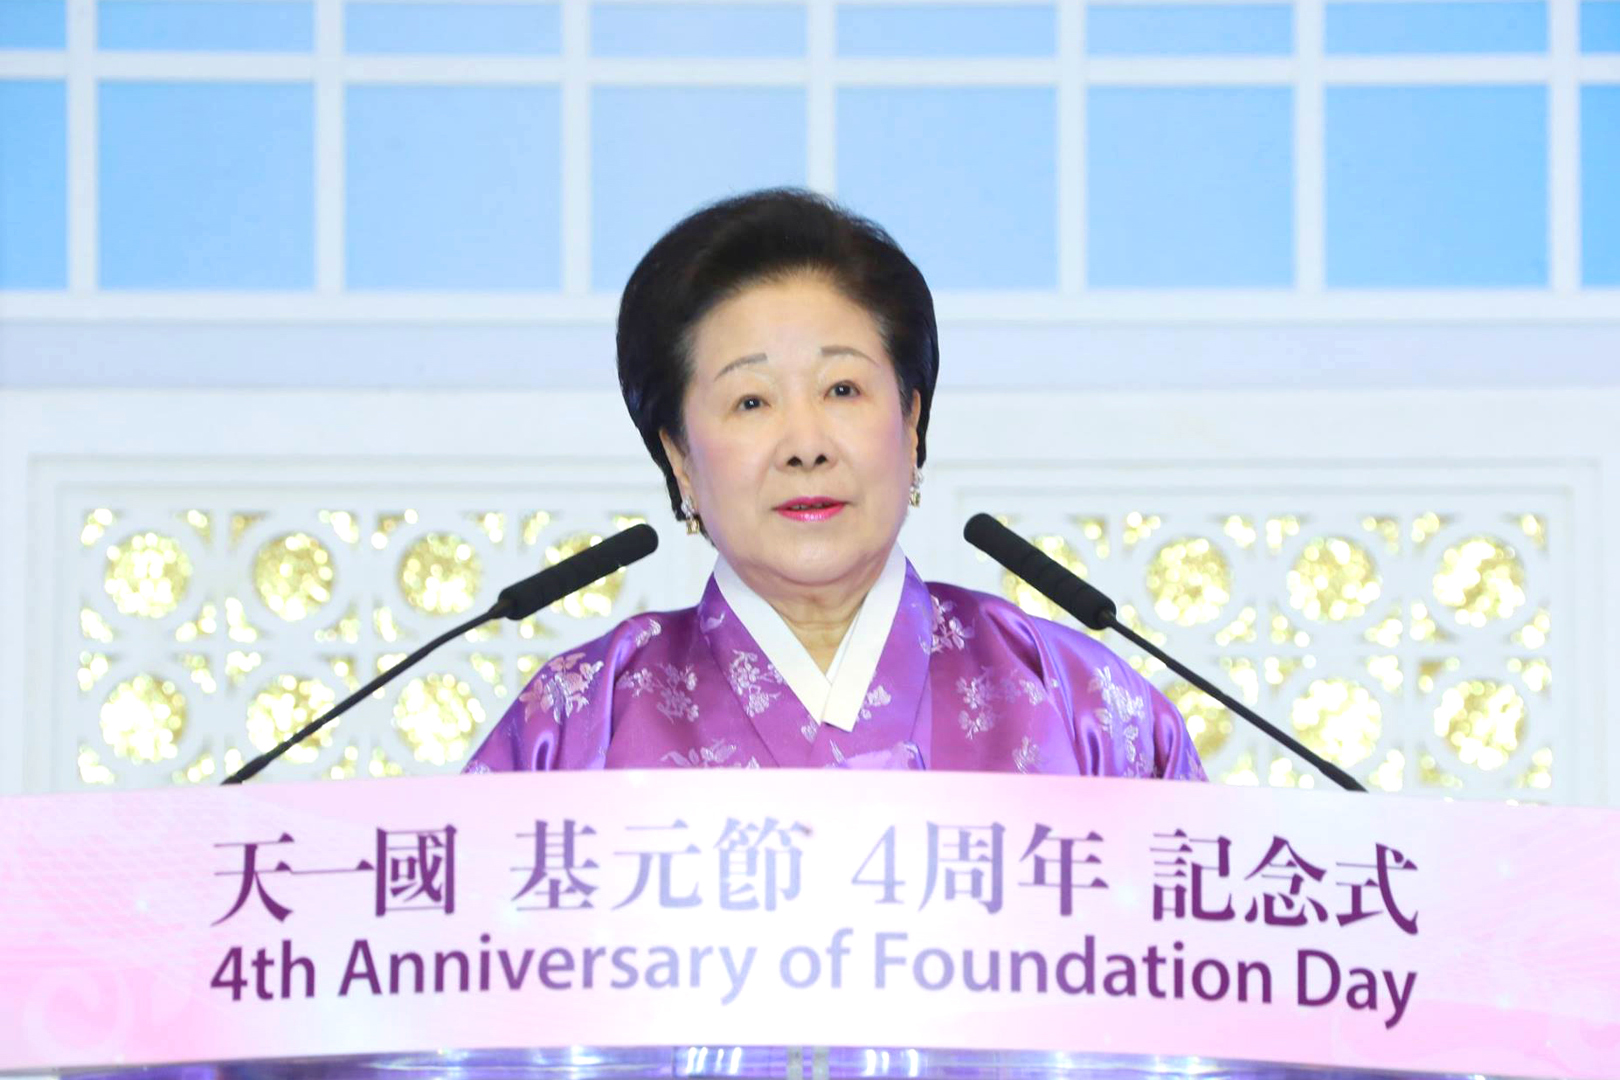 The Fourth Anniversary of Foundation Day (February 9 2017, Cheongpyeong Heaven and Earth Training Center)